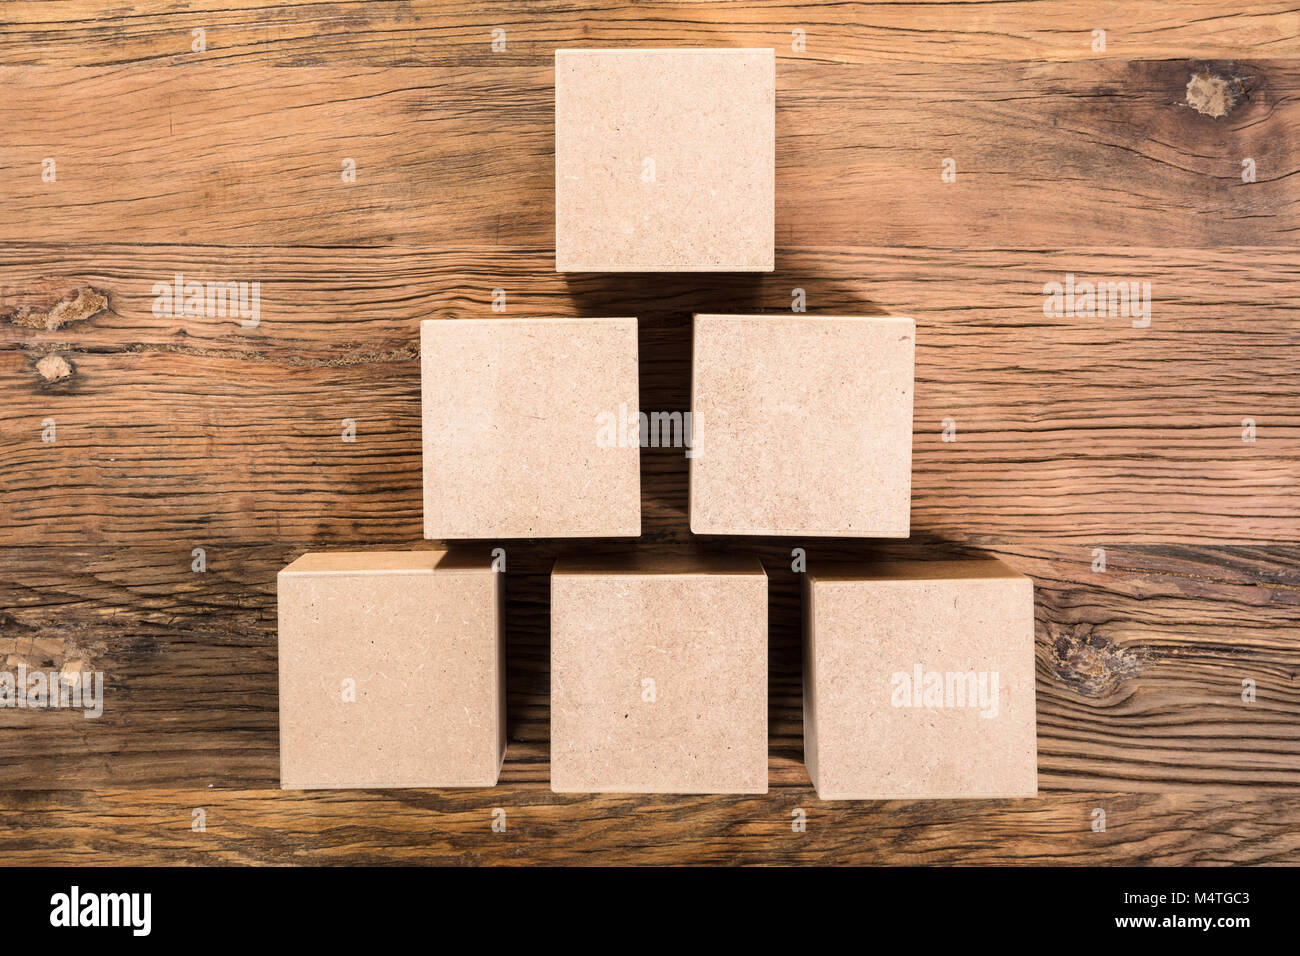 Elevated View Of Cube Arranged In Pyramid Shape Over The Wooden Table Stock Photo